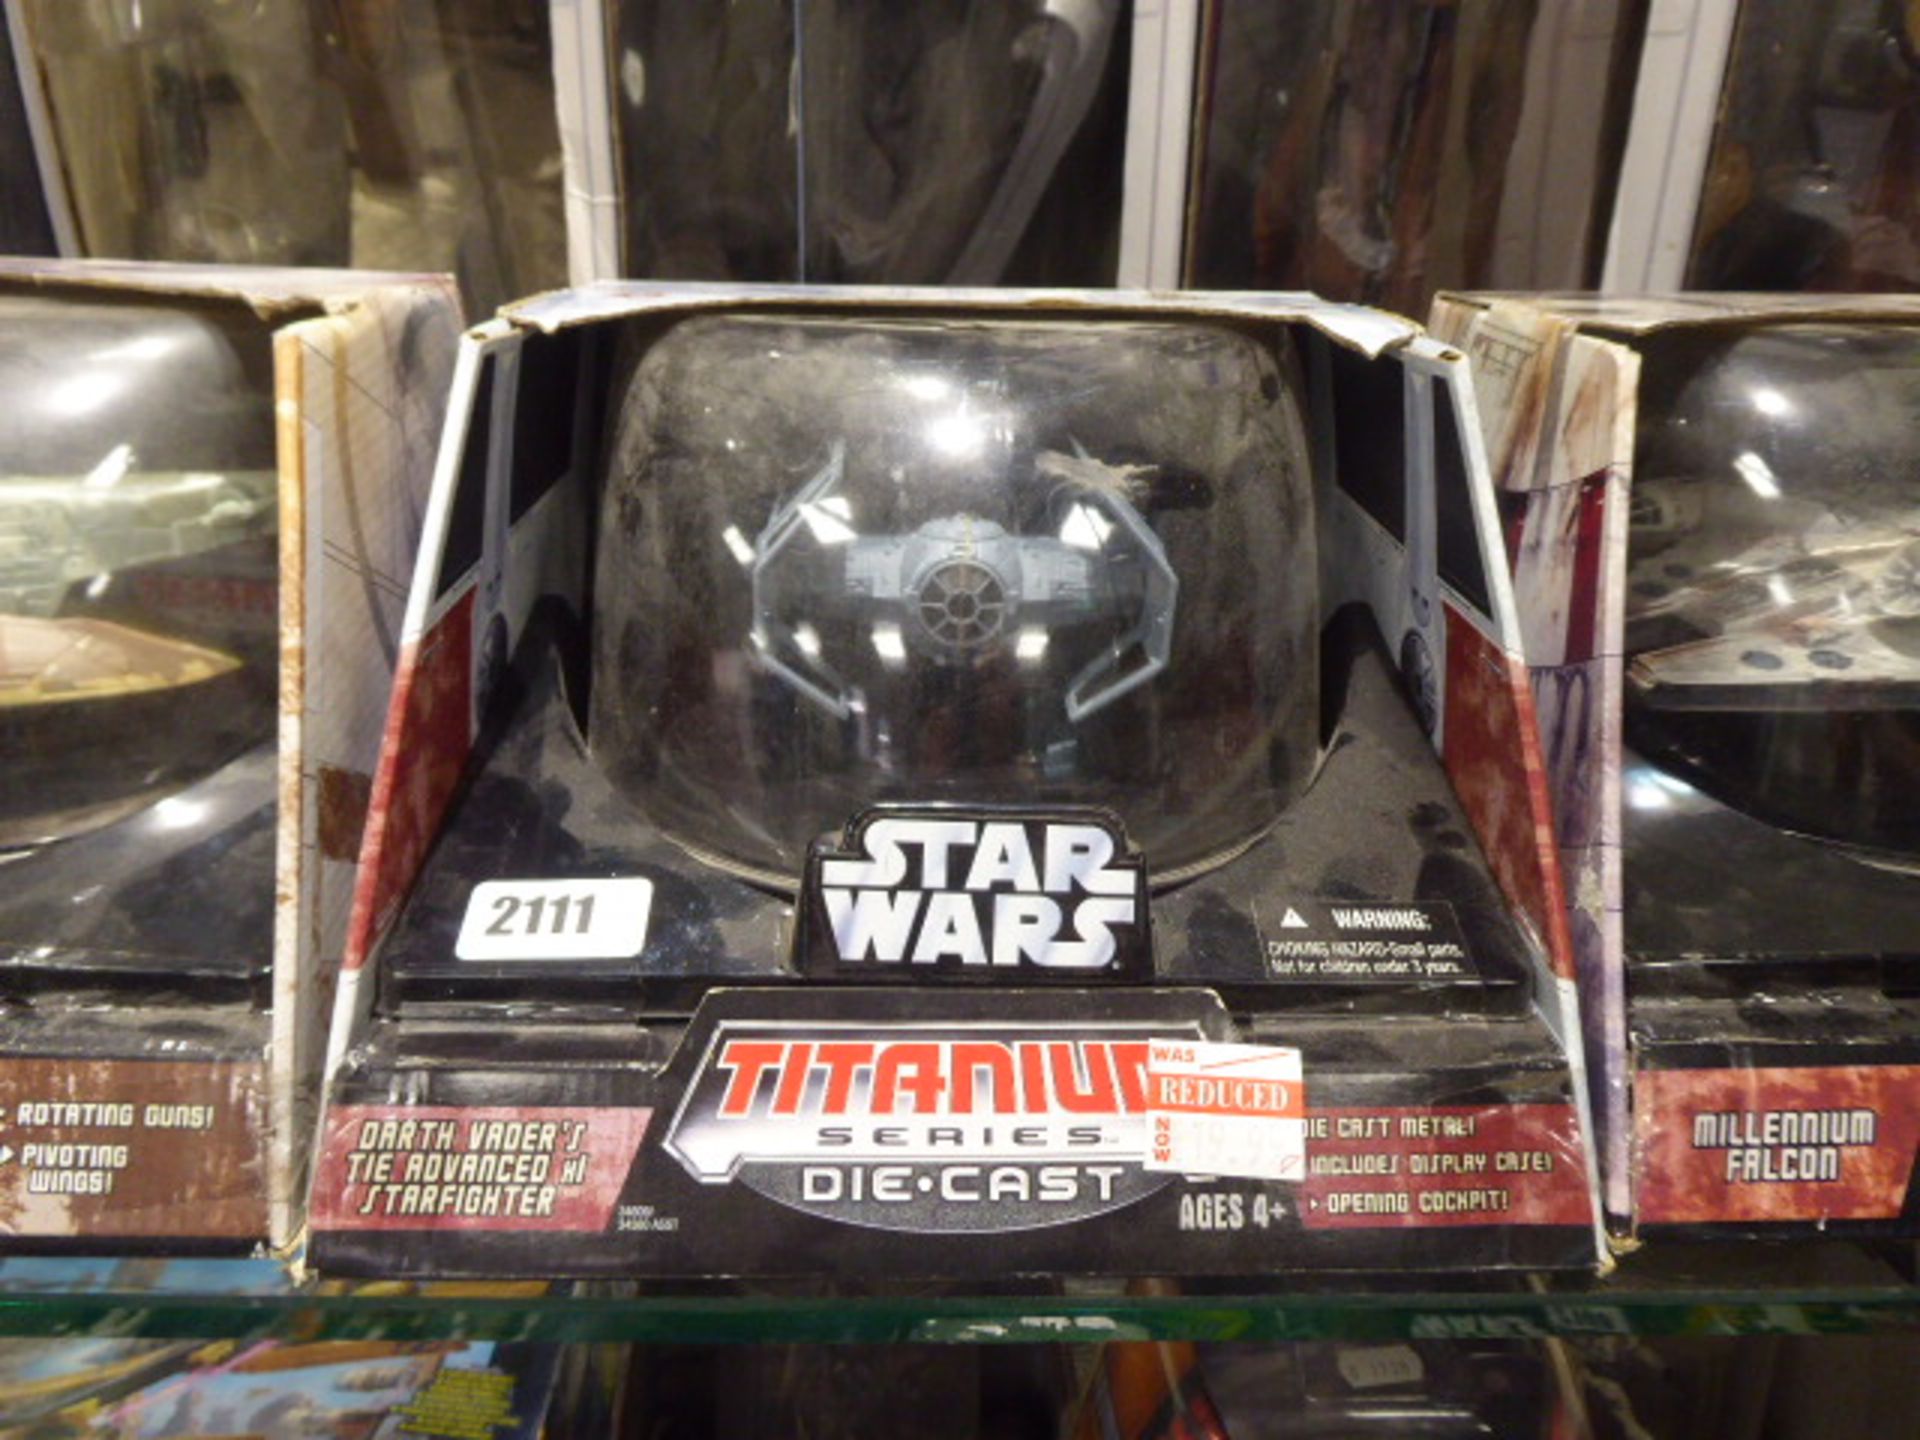 Titanium diecast series Star Wars vehicles to include Slave I, Darth Vader's Tie Advanced Star - Image 3 of 4